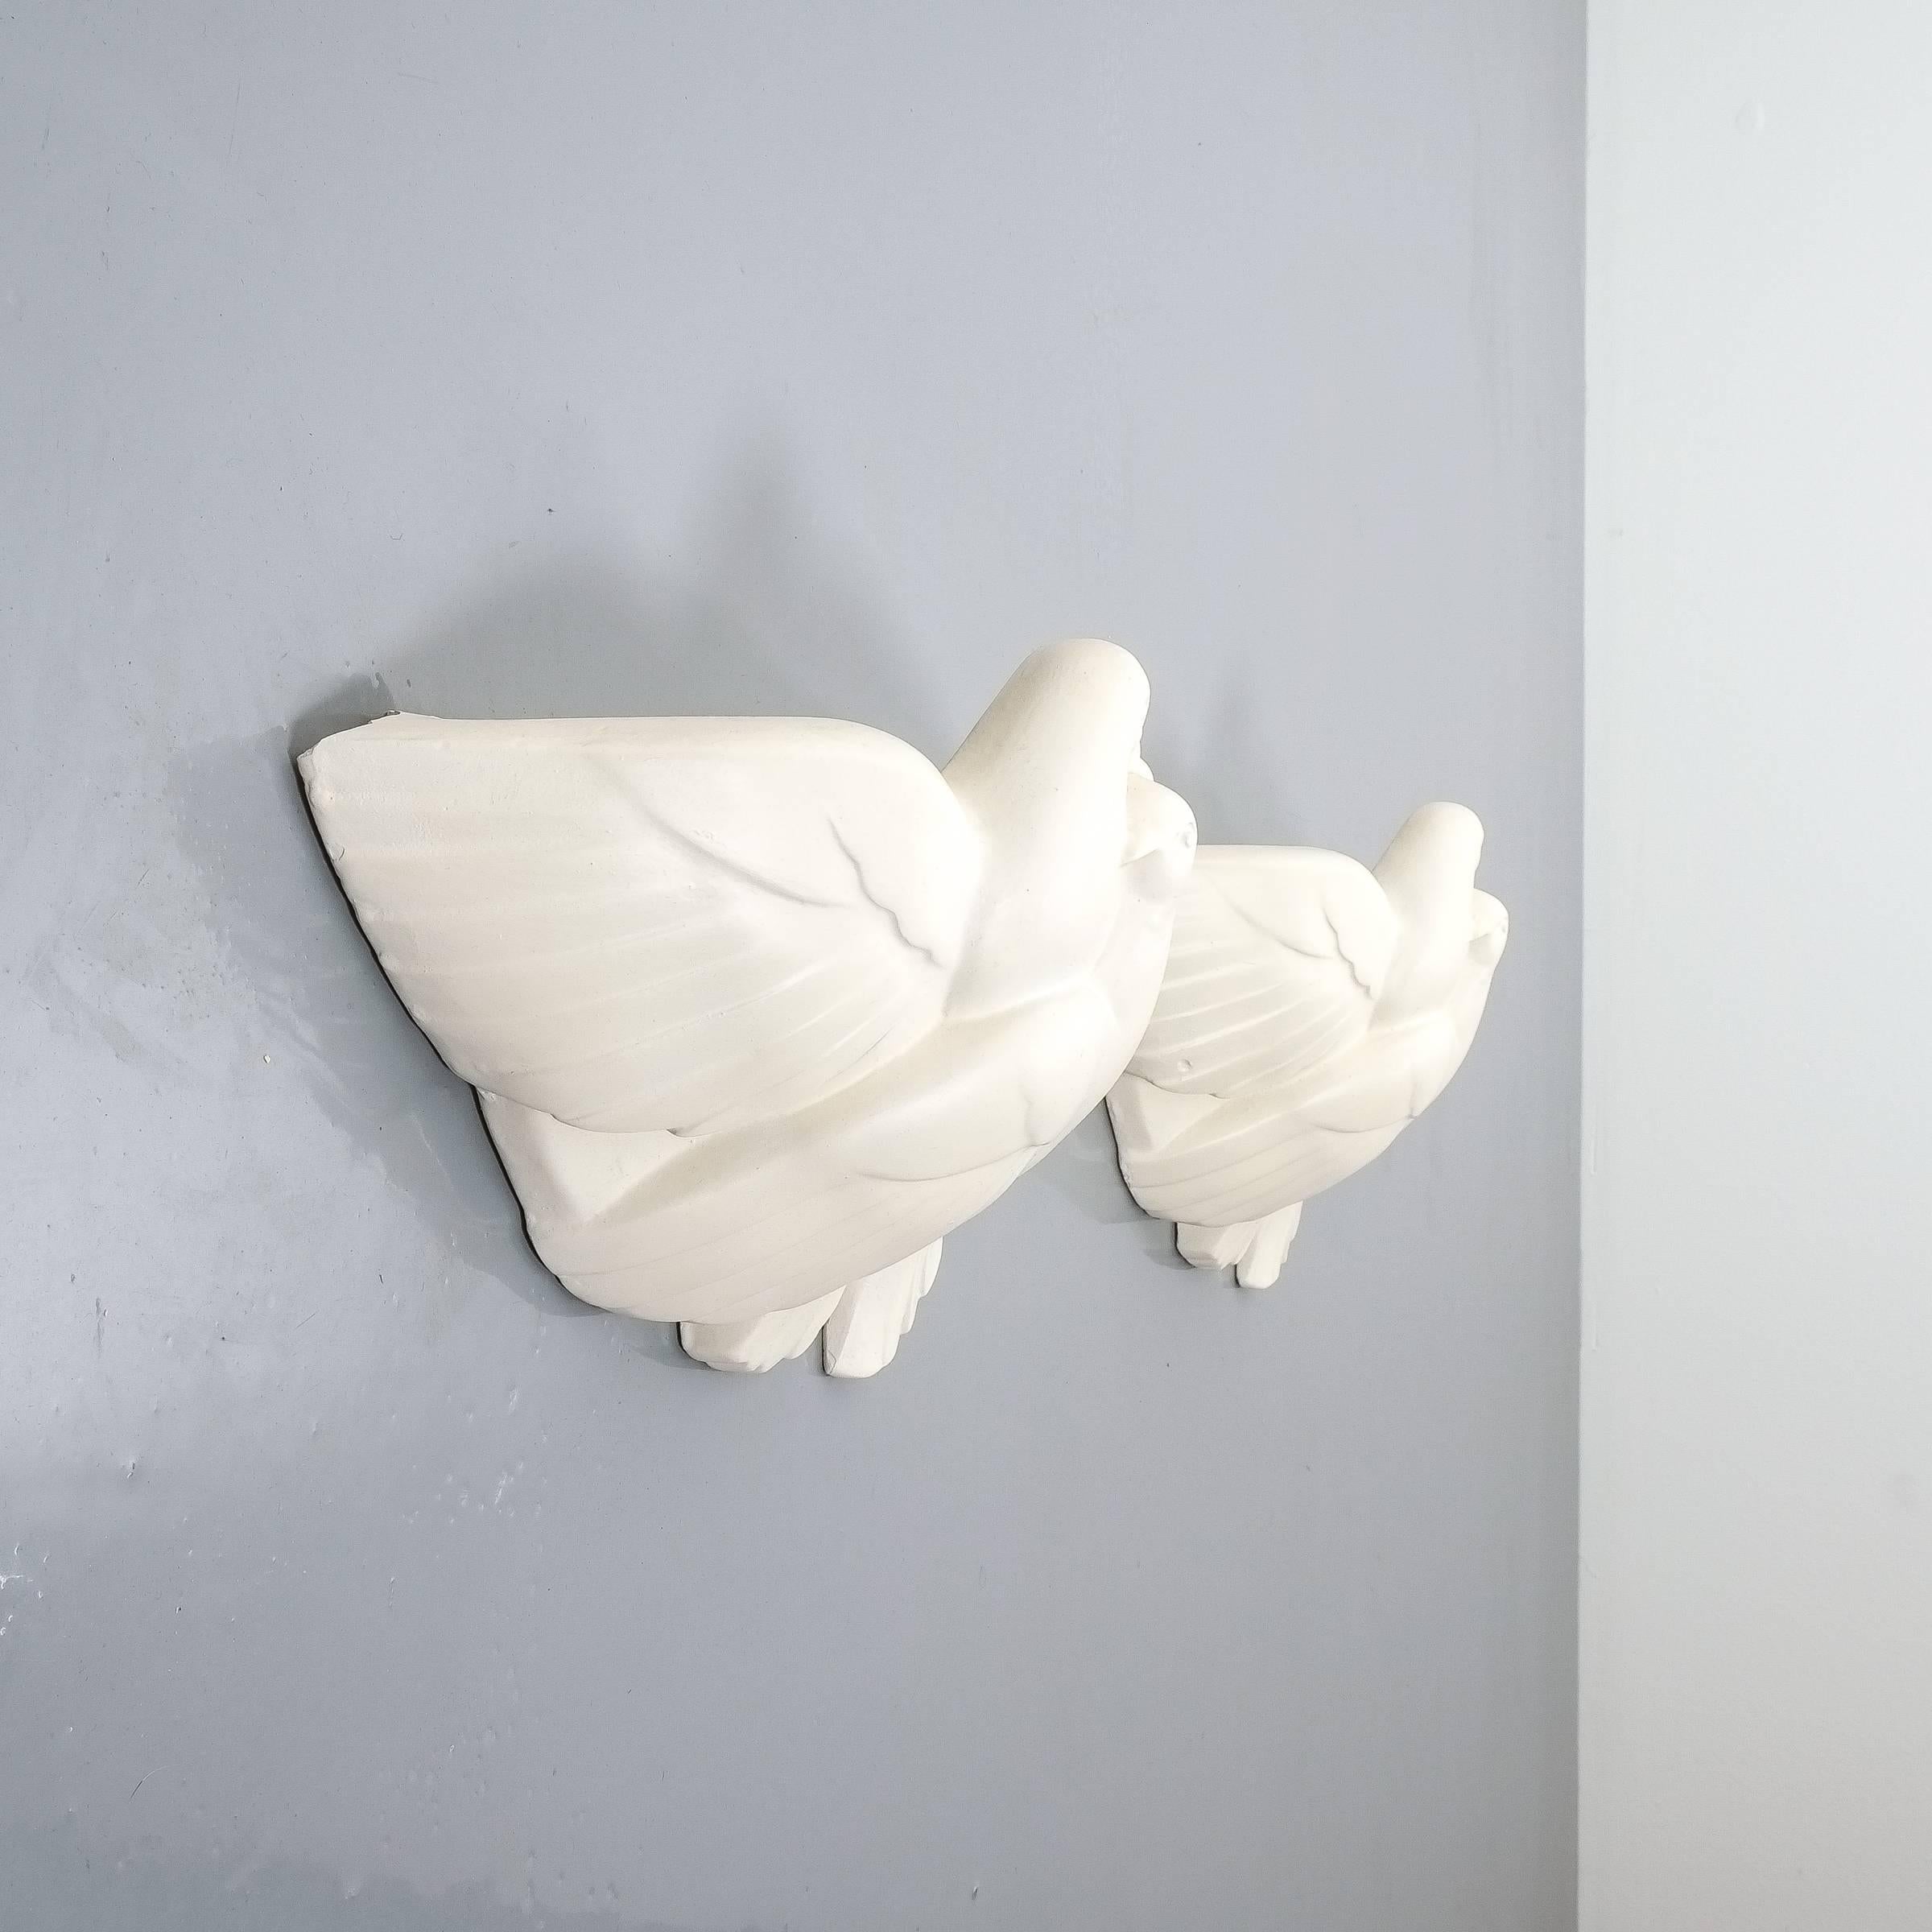 Pair of Art Deco white plaster dove sconces, France, circa 1935 (attr. Jacques Adnet). Rare pair of plaster wall lamps depicting some love birds. Uplight with one e14 bulb. One light shows a chip at the back (pictured) otherwise in excellent